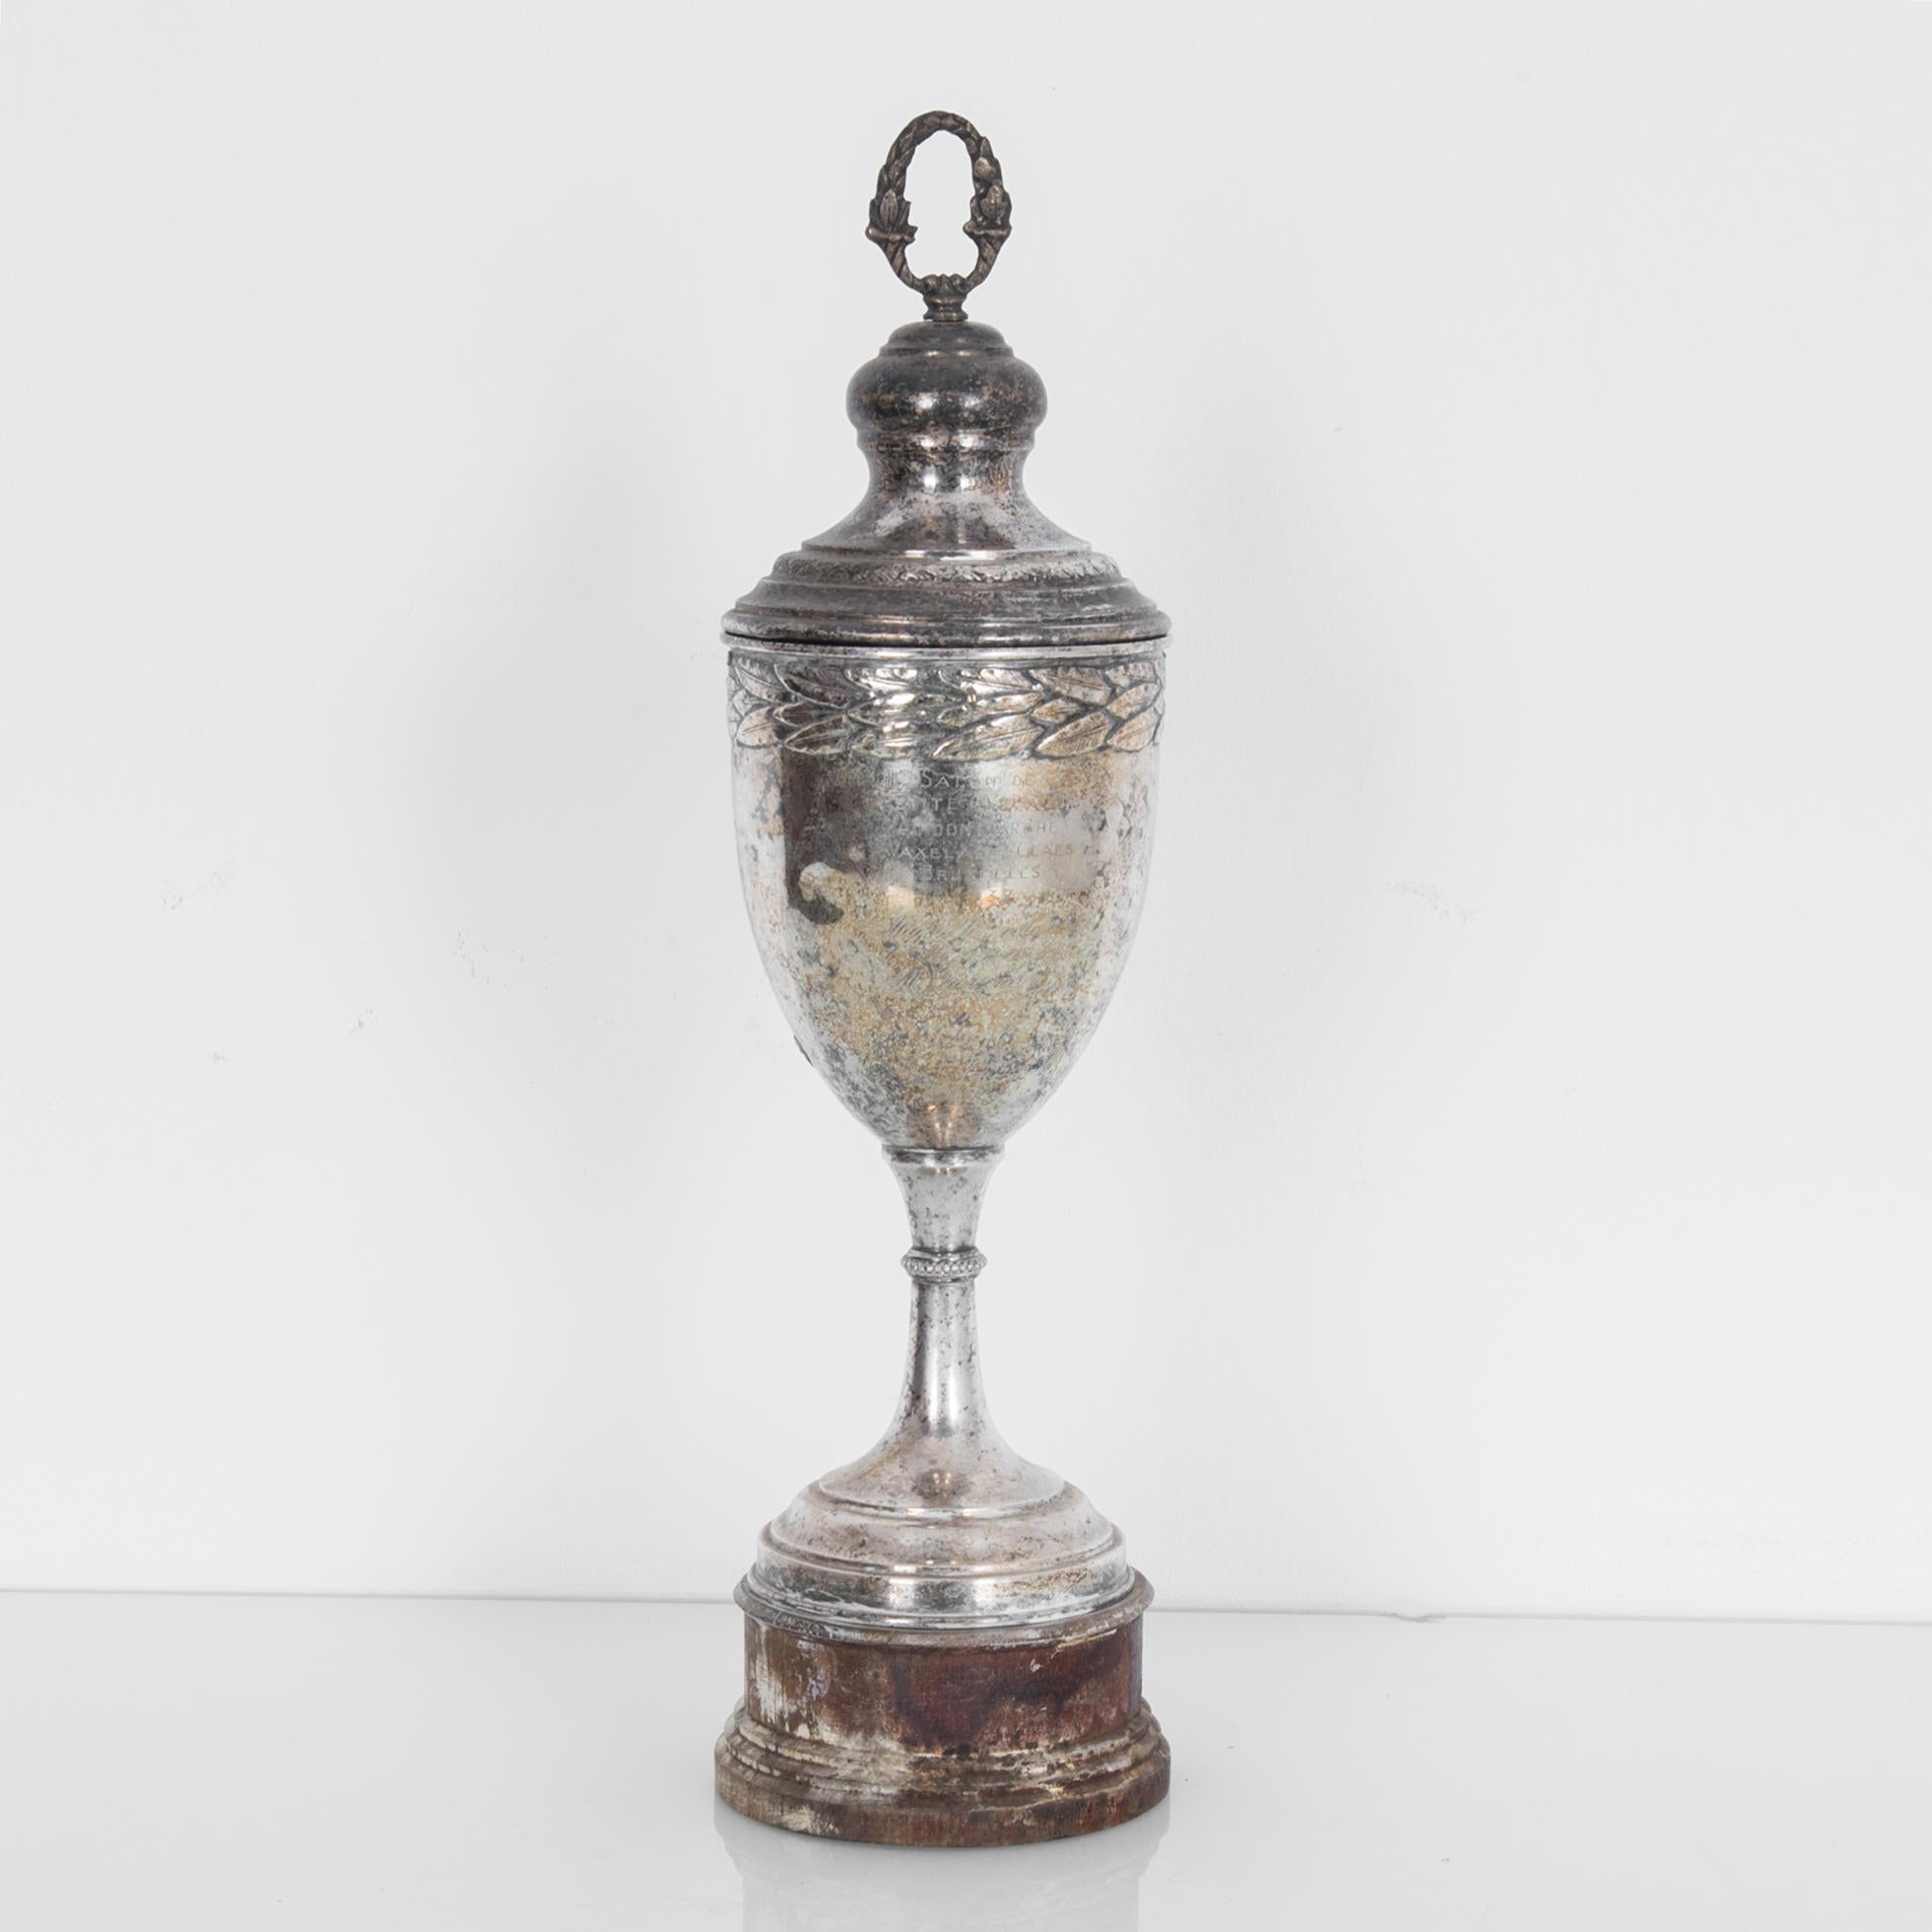 A silver plated trophy from Europe, made circa 1900-1930. A slender silver cup topped with a victory wreath, girdled with a circle of laurel leaves. The tarnishing of the silver obscures the words engraved into the surface, lending the trophy a